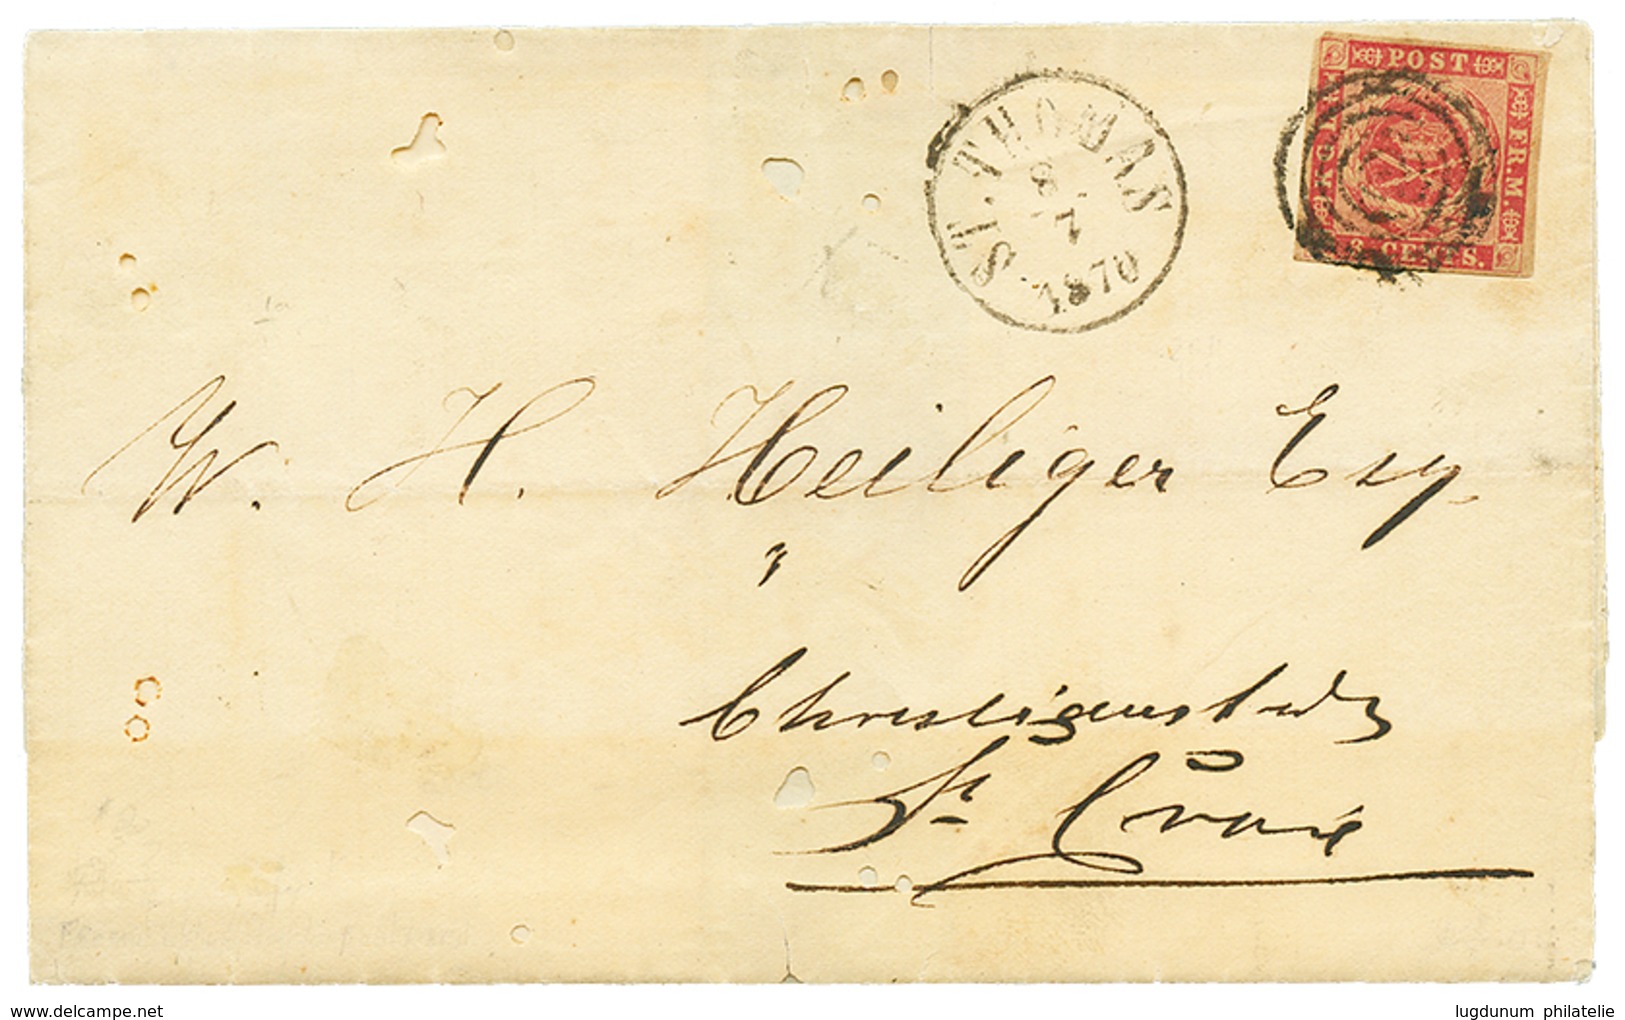 DANISH WEST INDIES : 1870 2c Carmin With 4 Nice Margins Canc. On Cover(faults) From ST THOMAS To STE CROIX. RARE. NIELSE - Dänische Antillen (Westindien)